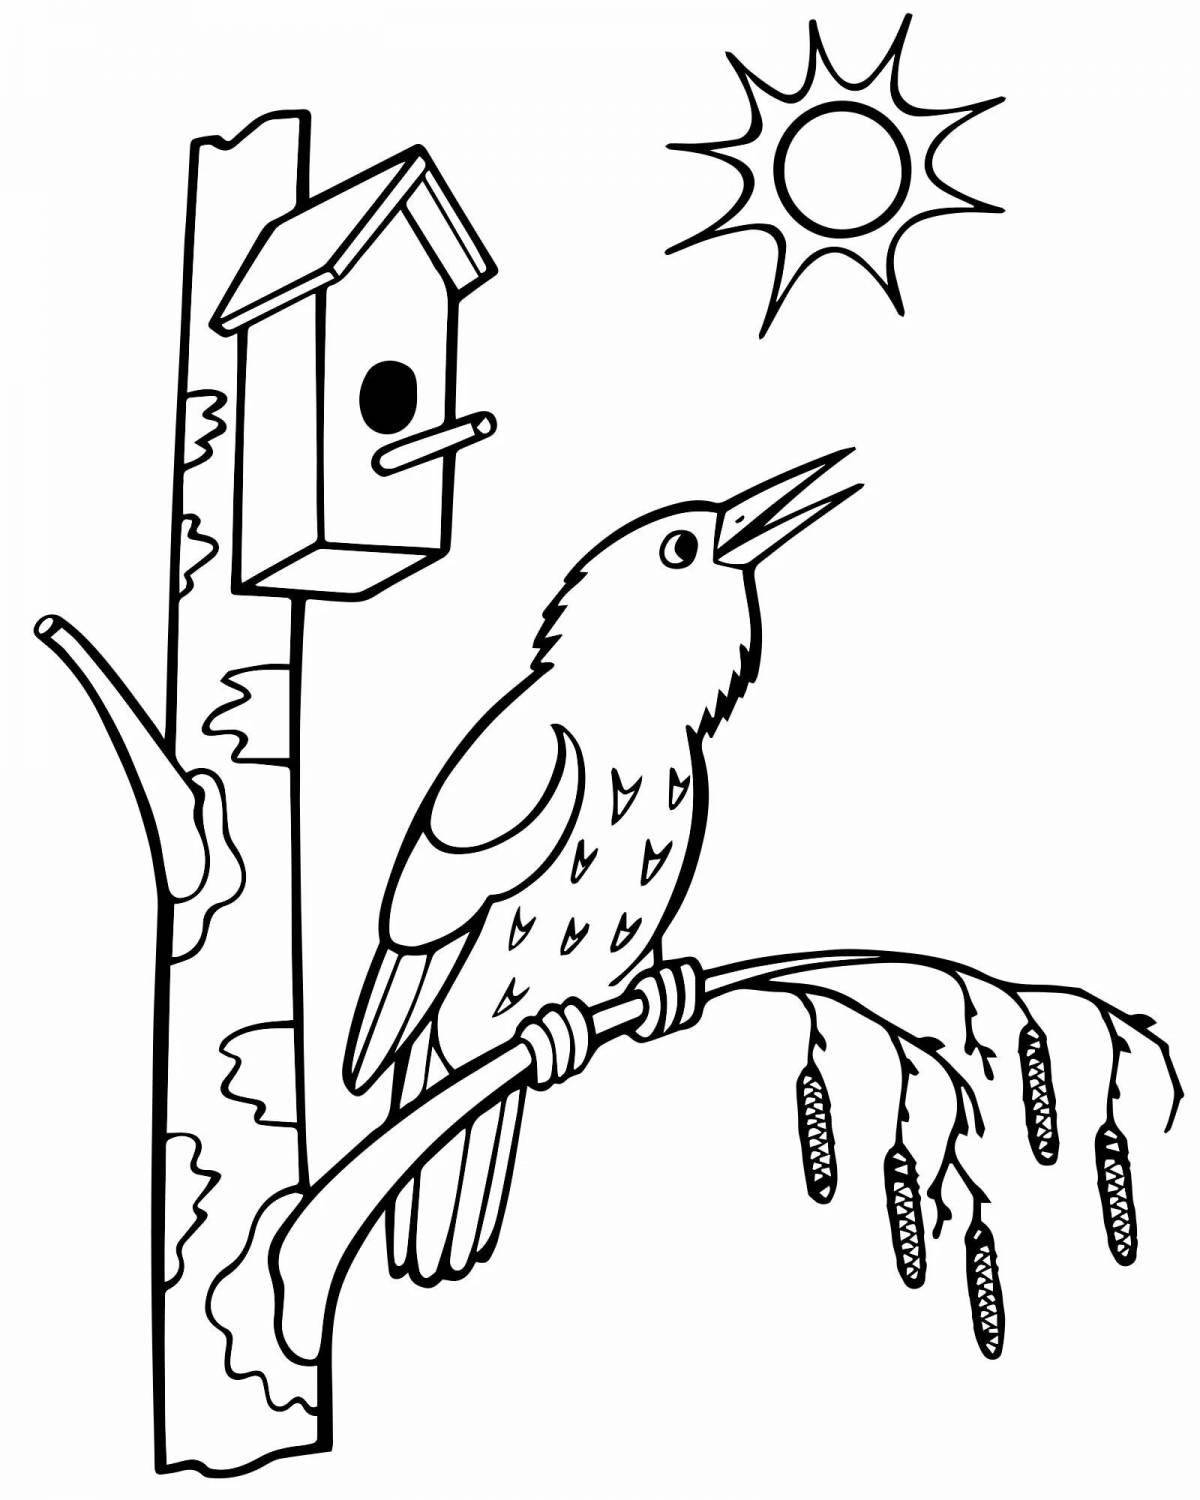 Colorful birdhouse coloring page for 3-4 year olds